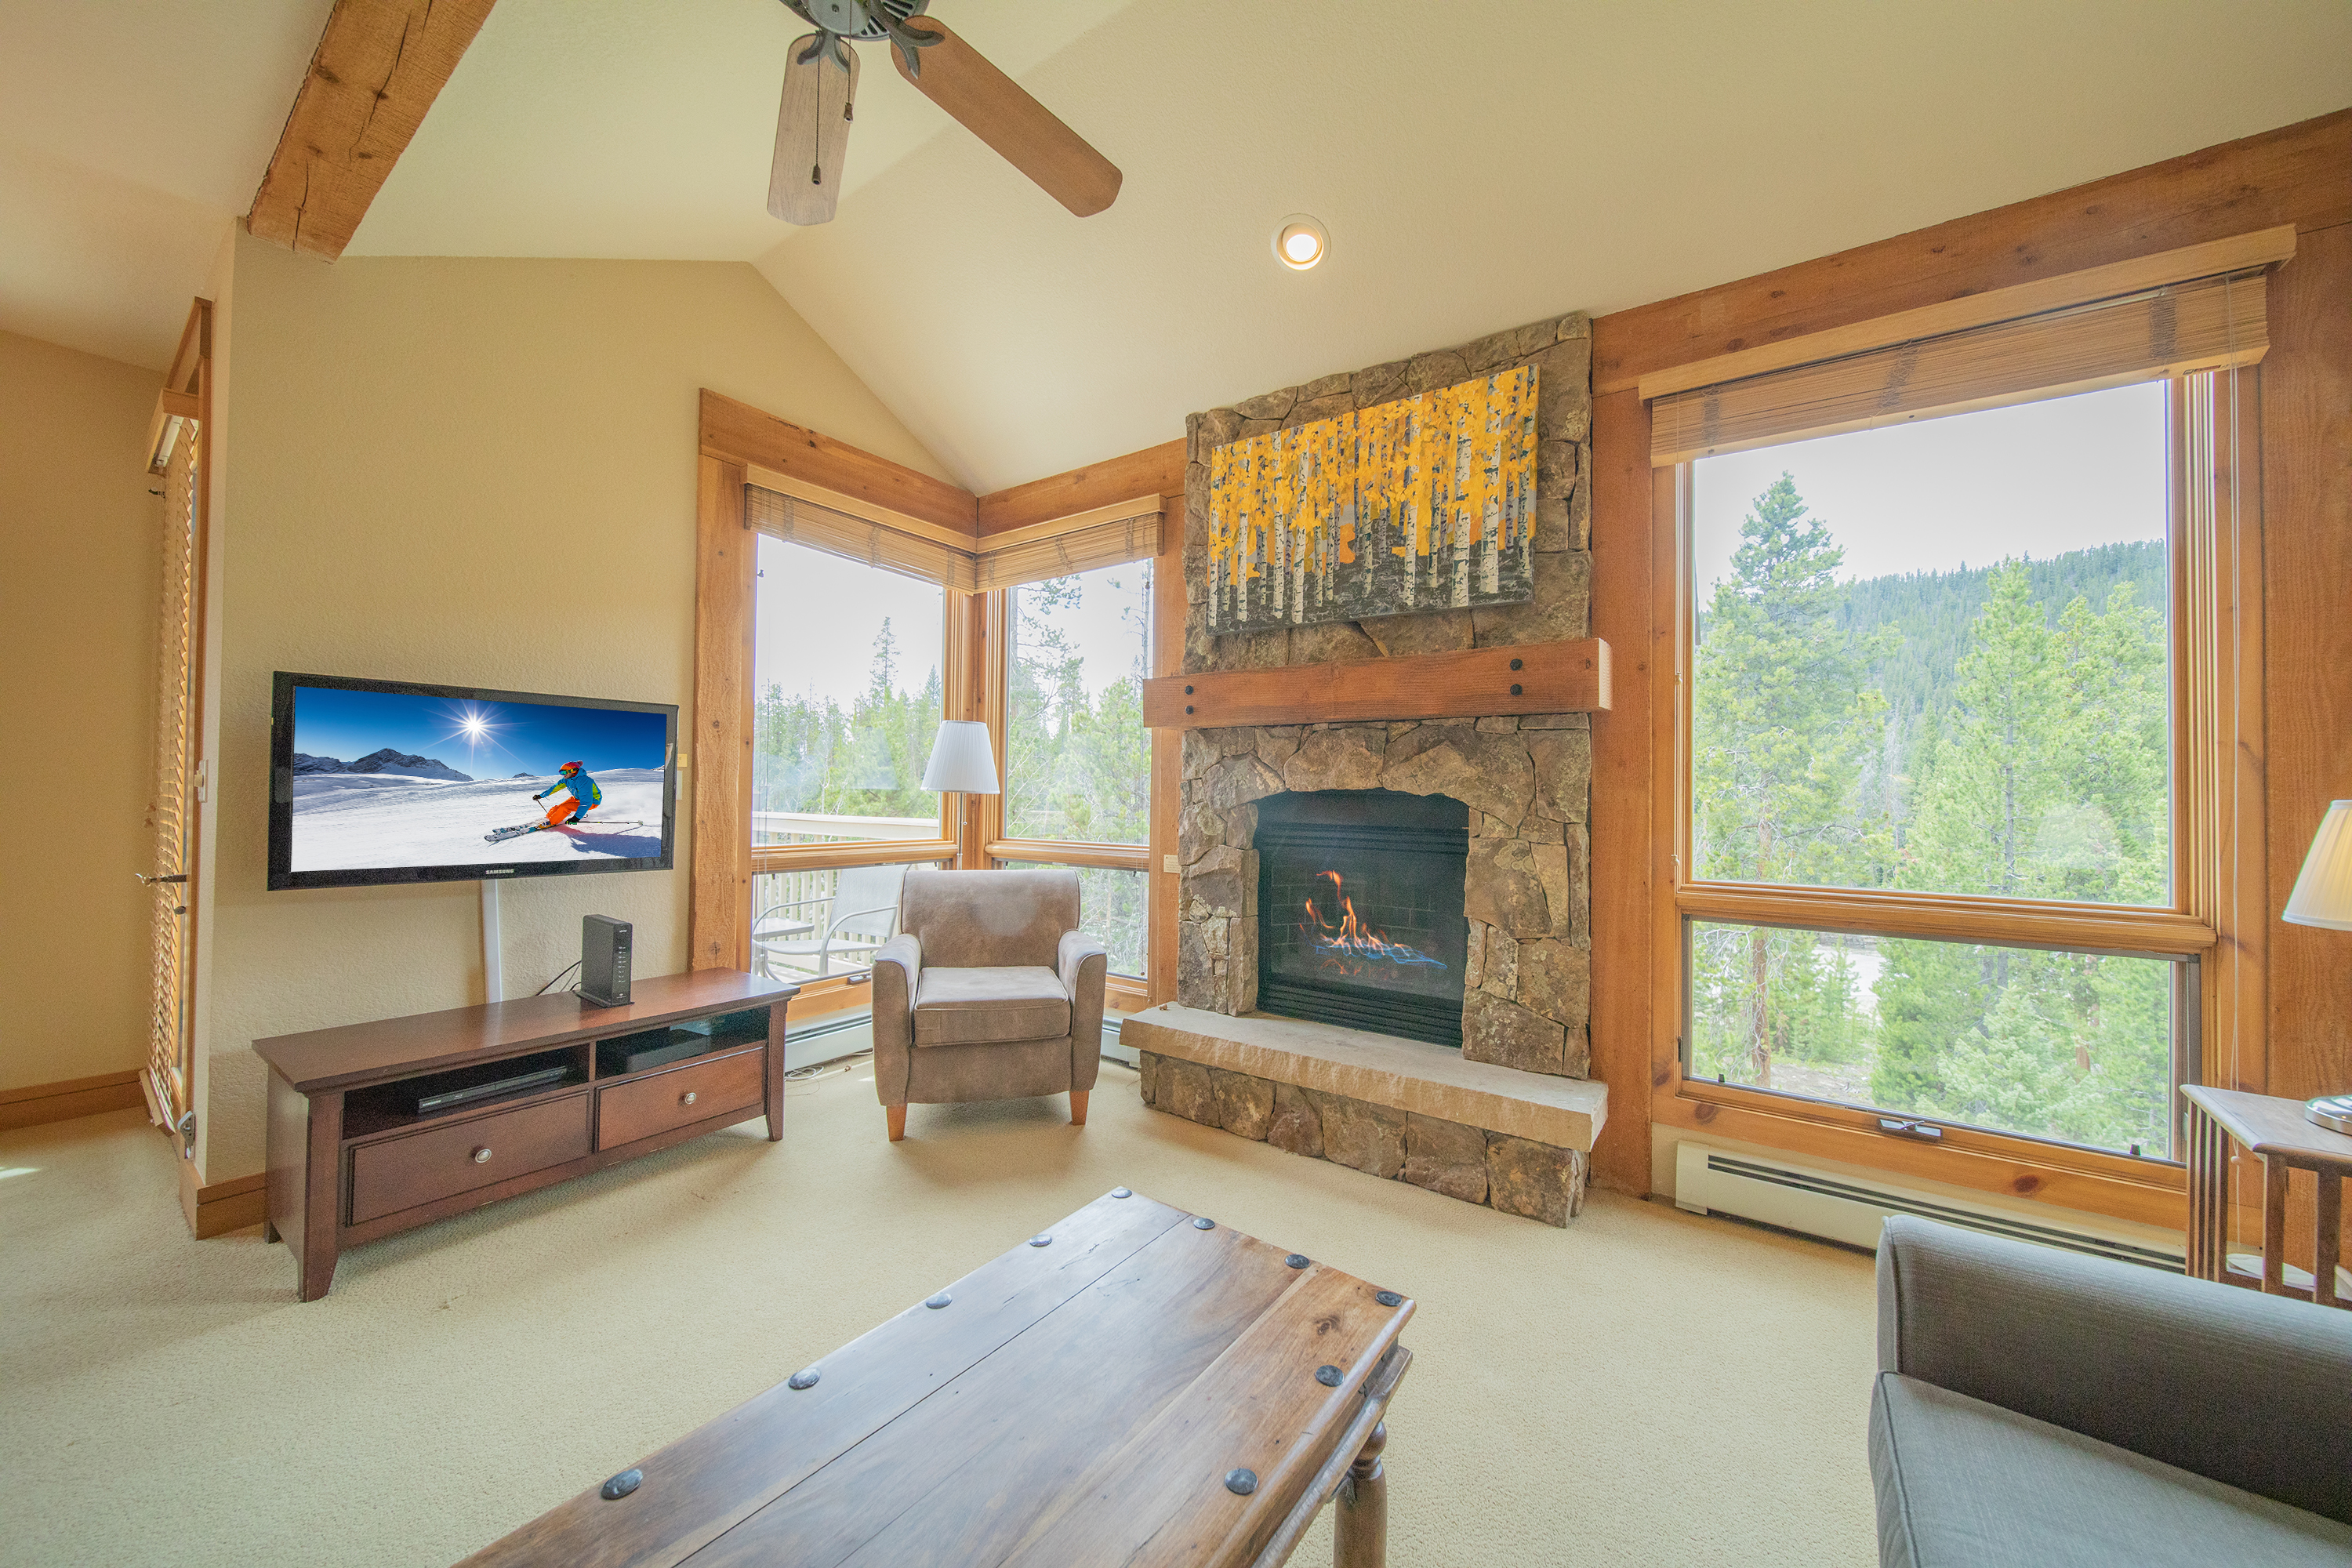 Attractive vacation home at Settlers Creek!